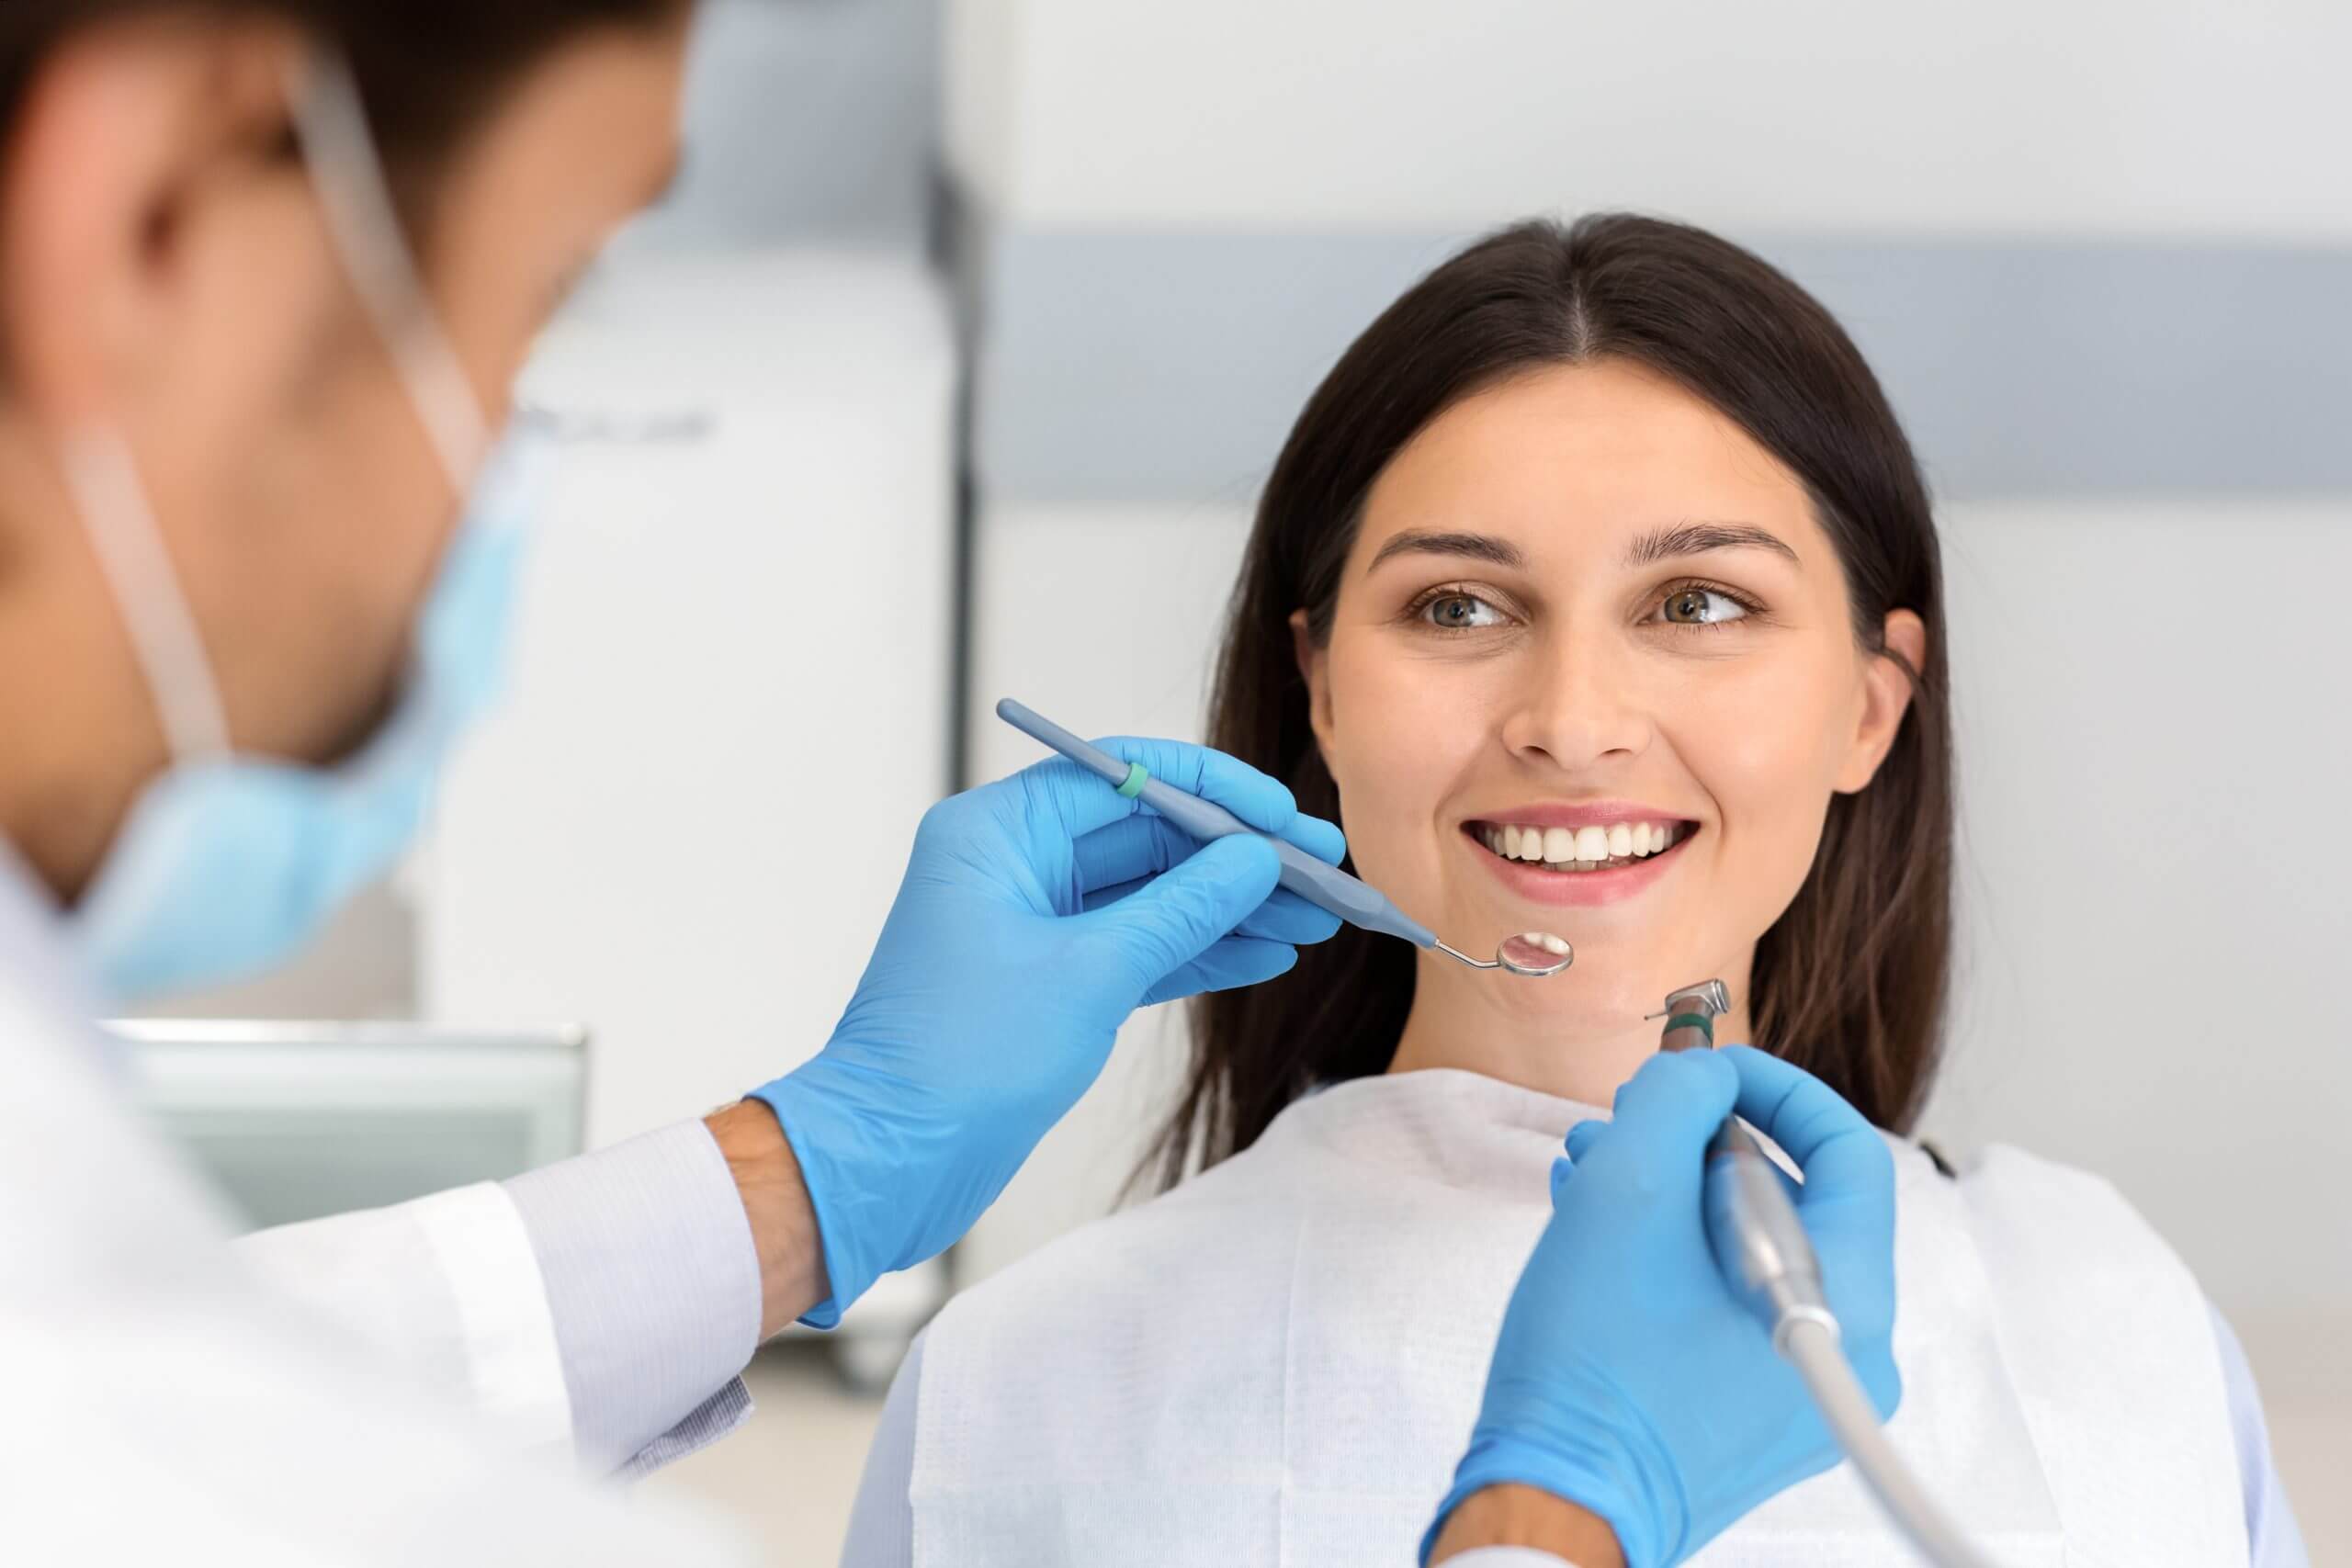 Smiling woman looking at dentist with trust